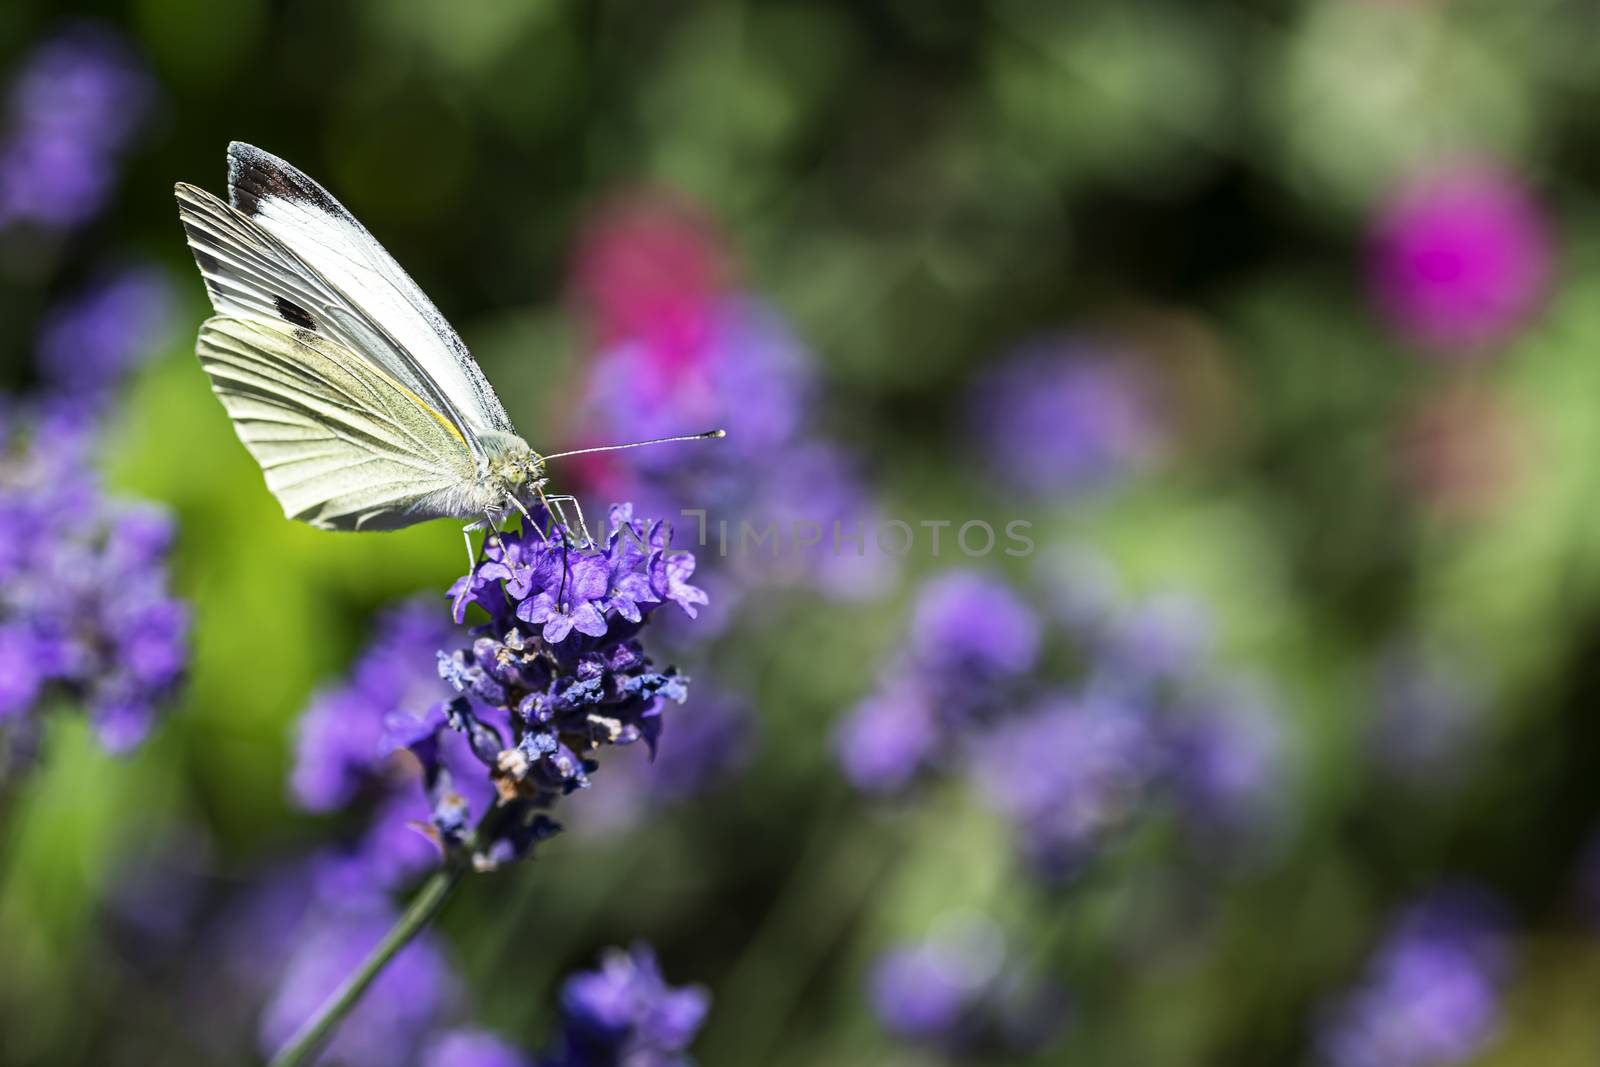 Pieris rapae, white yellow butterfly landing on the lavender blossom against a blurry background by ankorlight